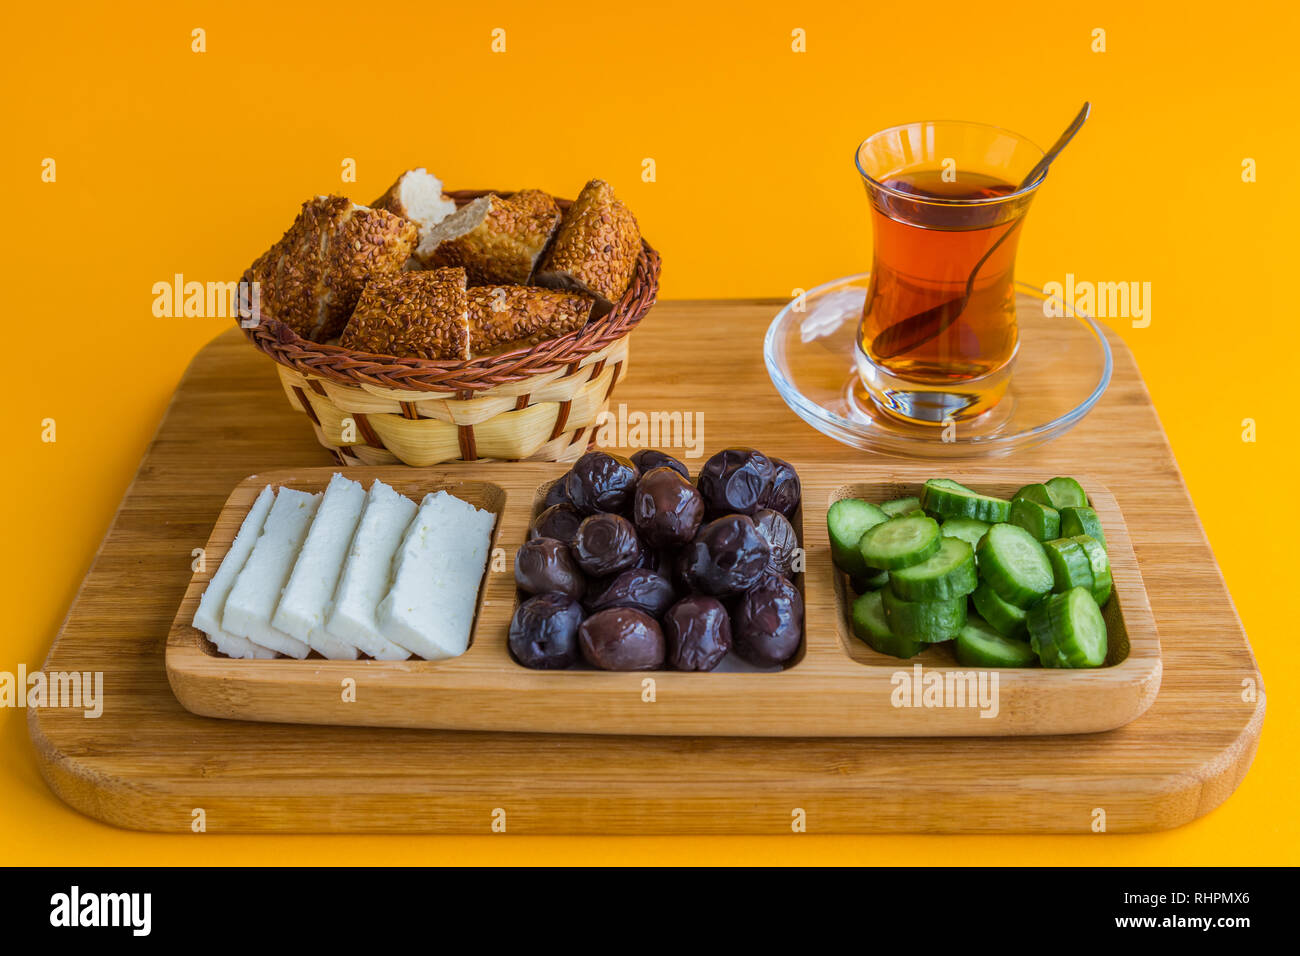 Typical Turkish breakfast of simit, cucumber, olives, and cheese, with Turkish tea, served in a glass. Stock Photo